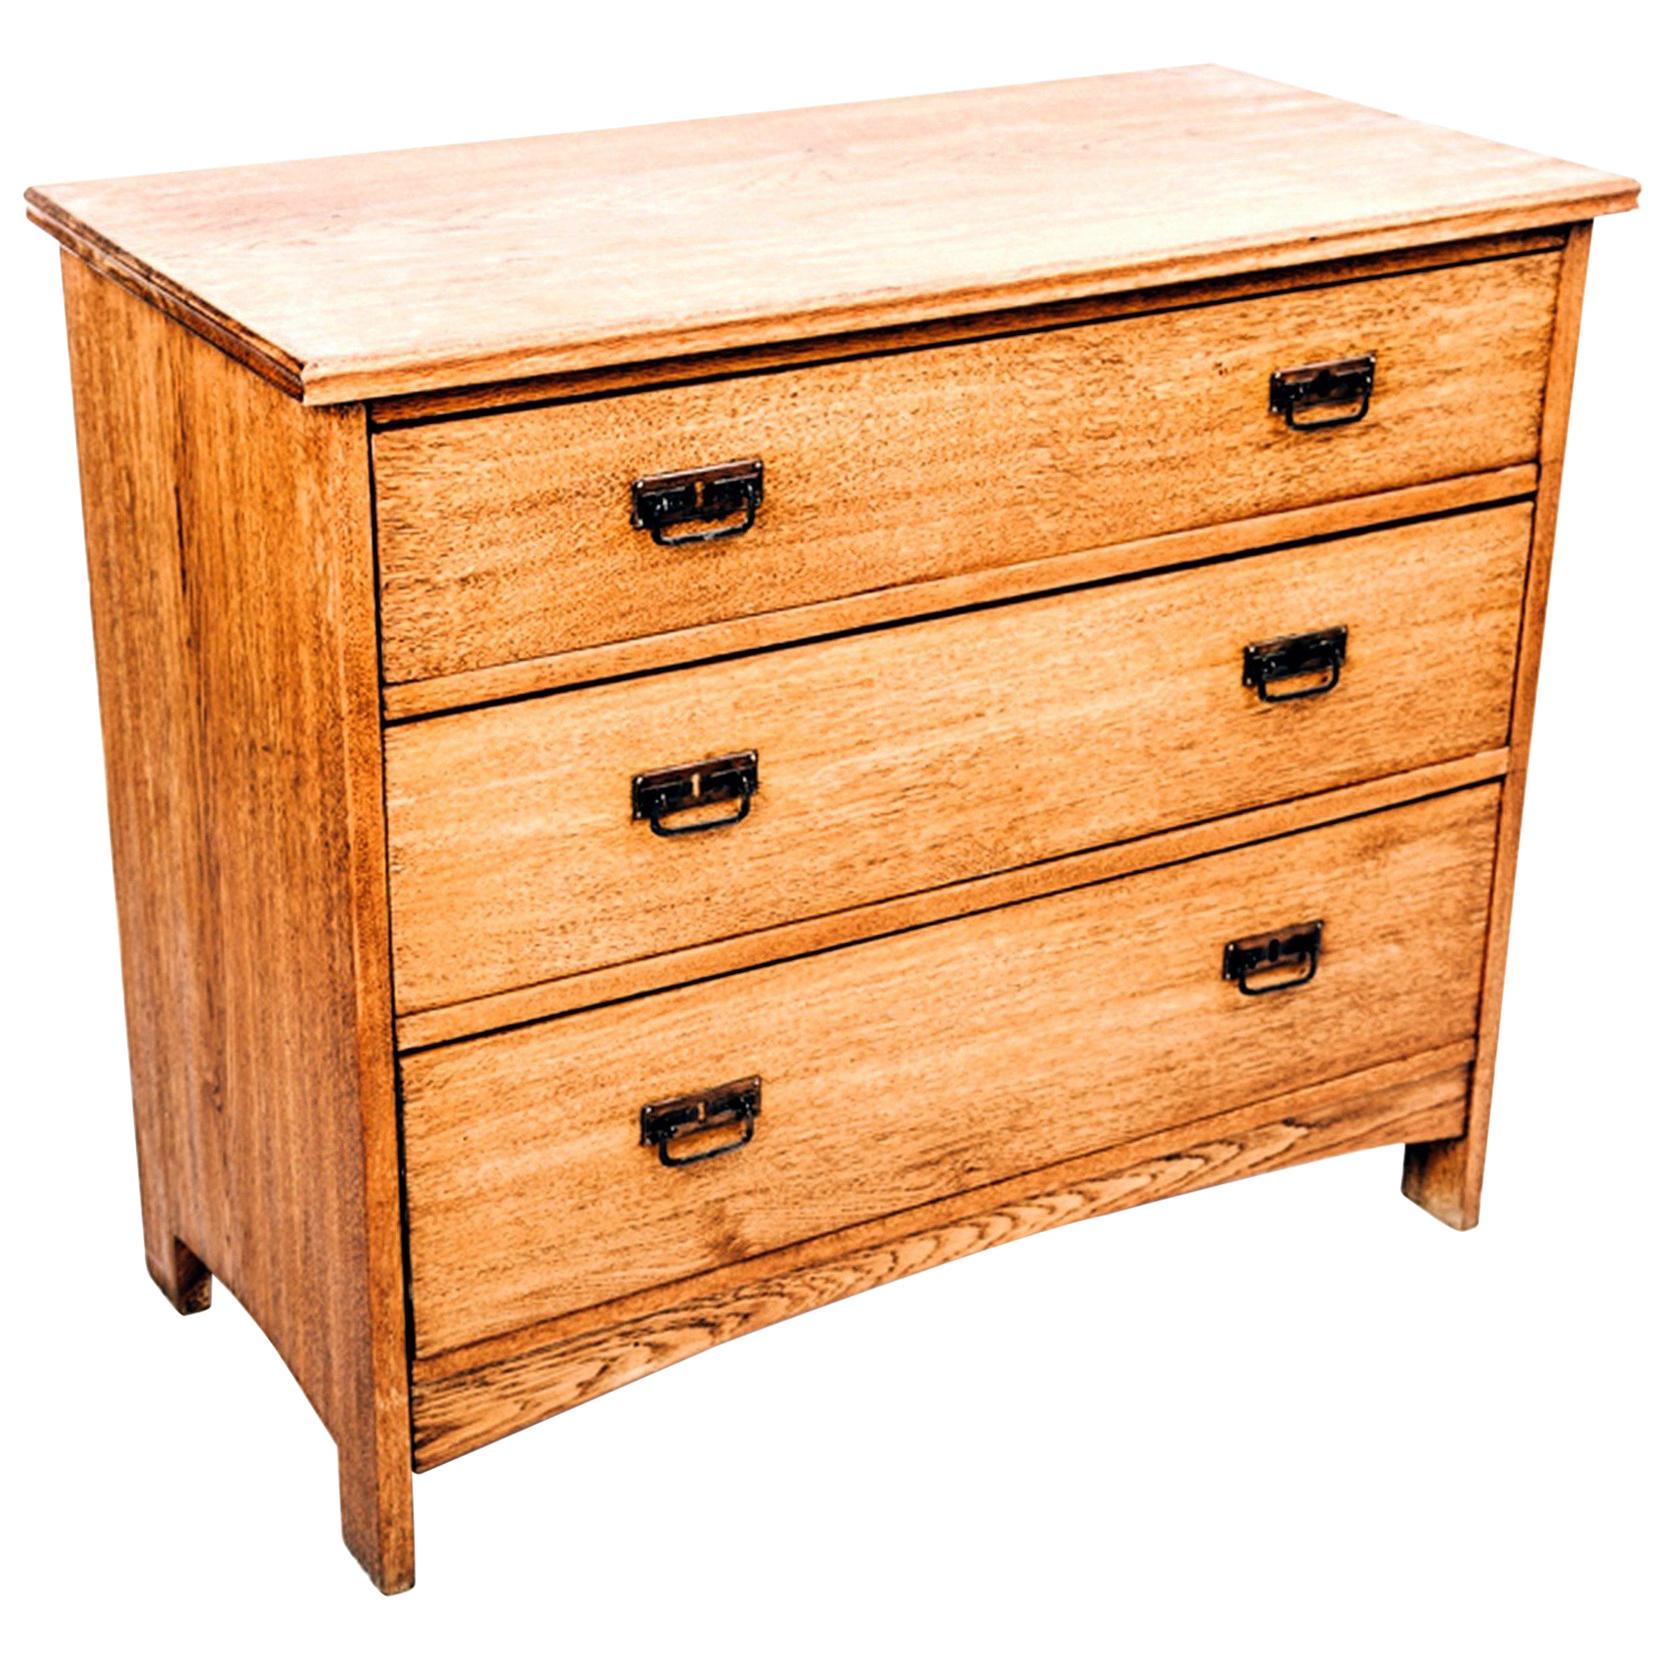 Swedish Solid Oak Chest of Drawers from Early 1900s For Sale